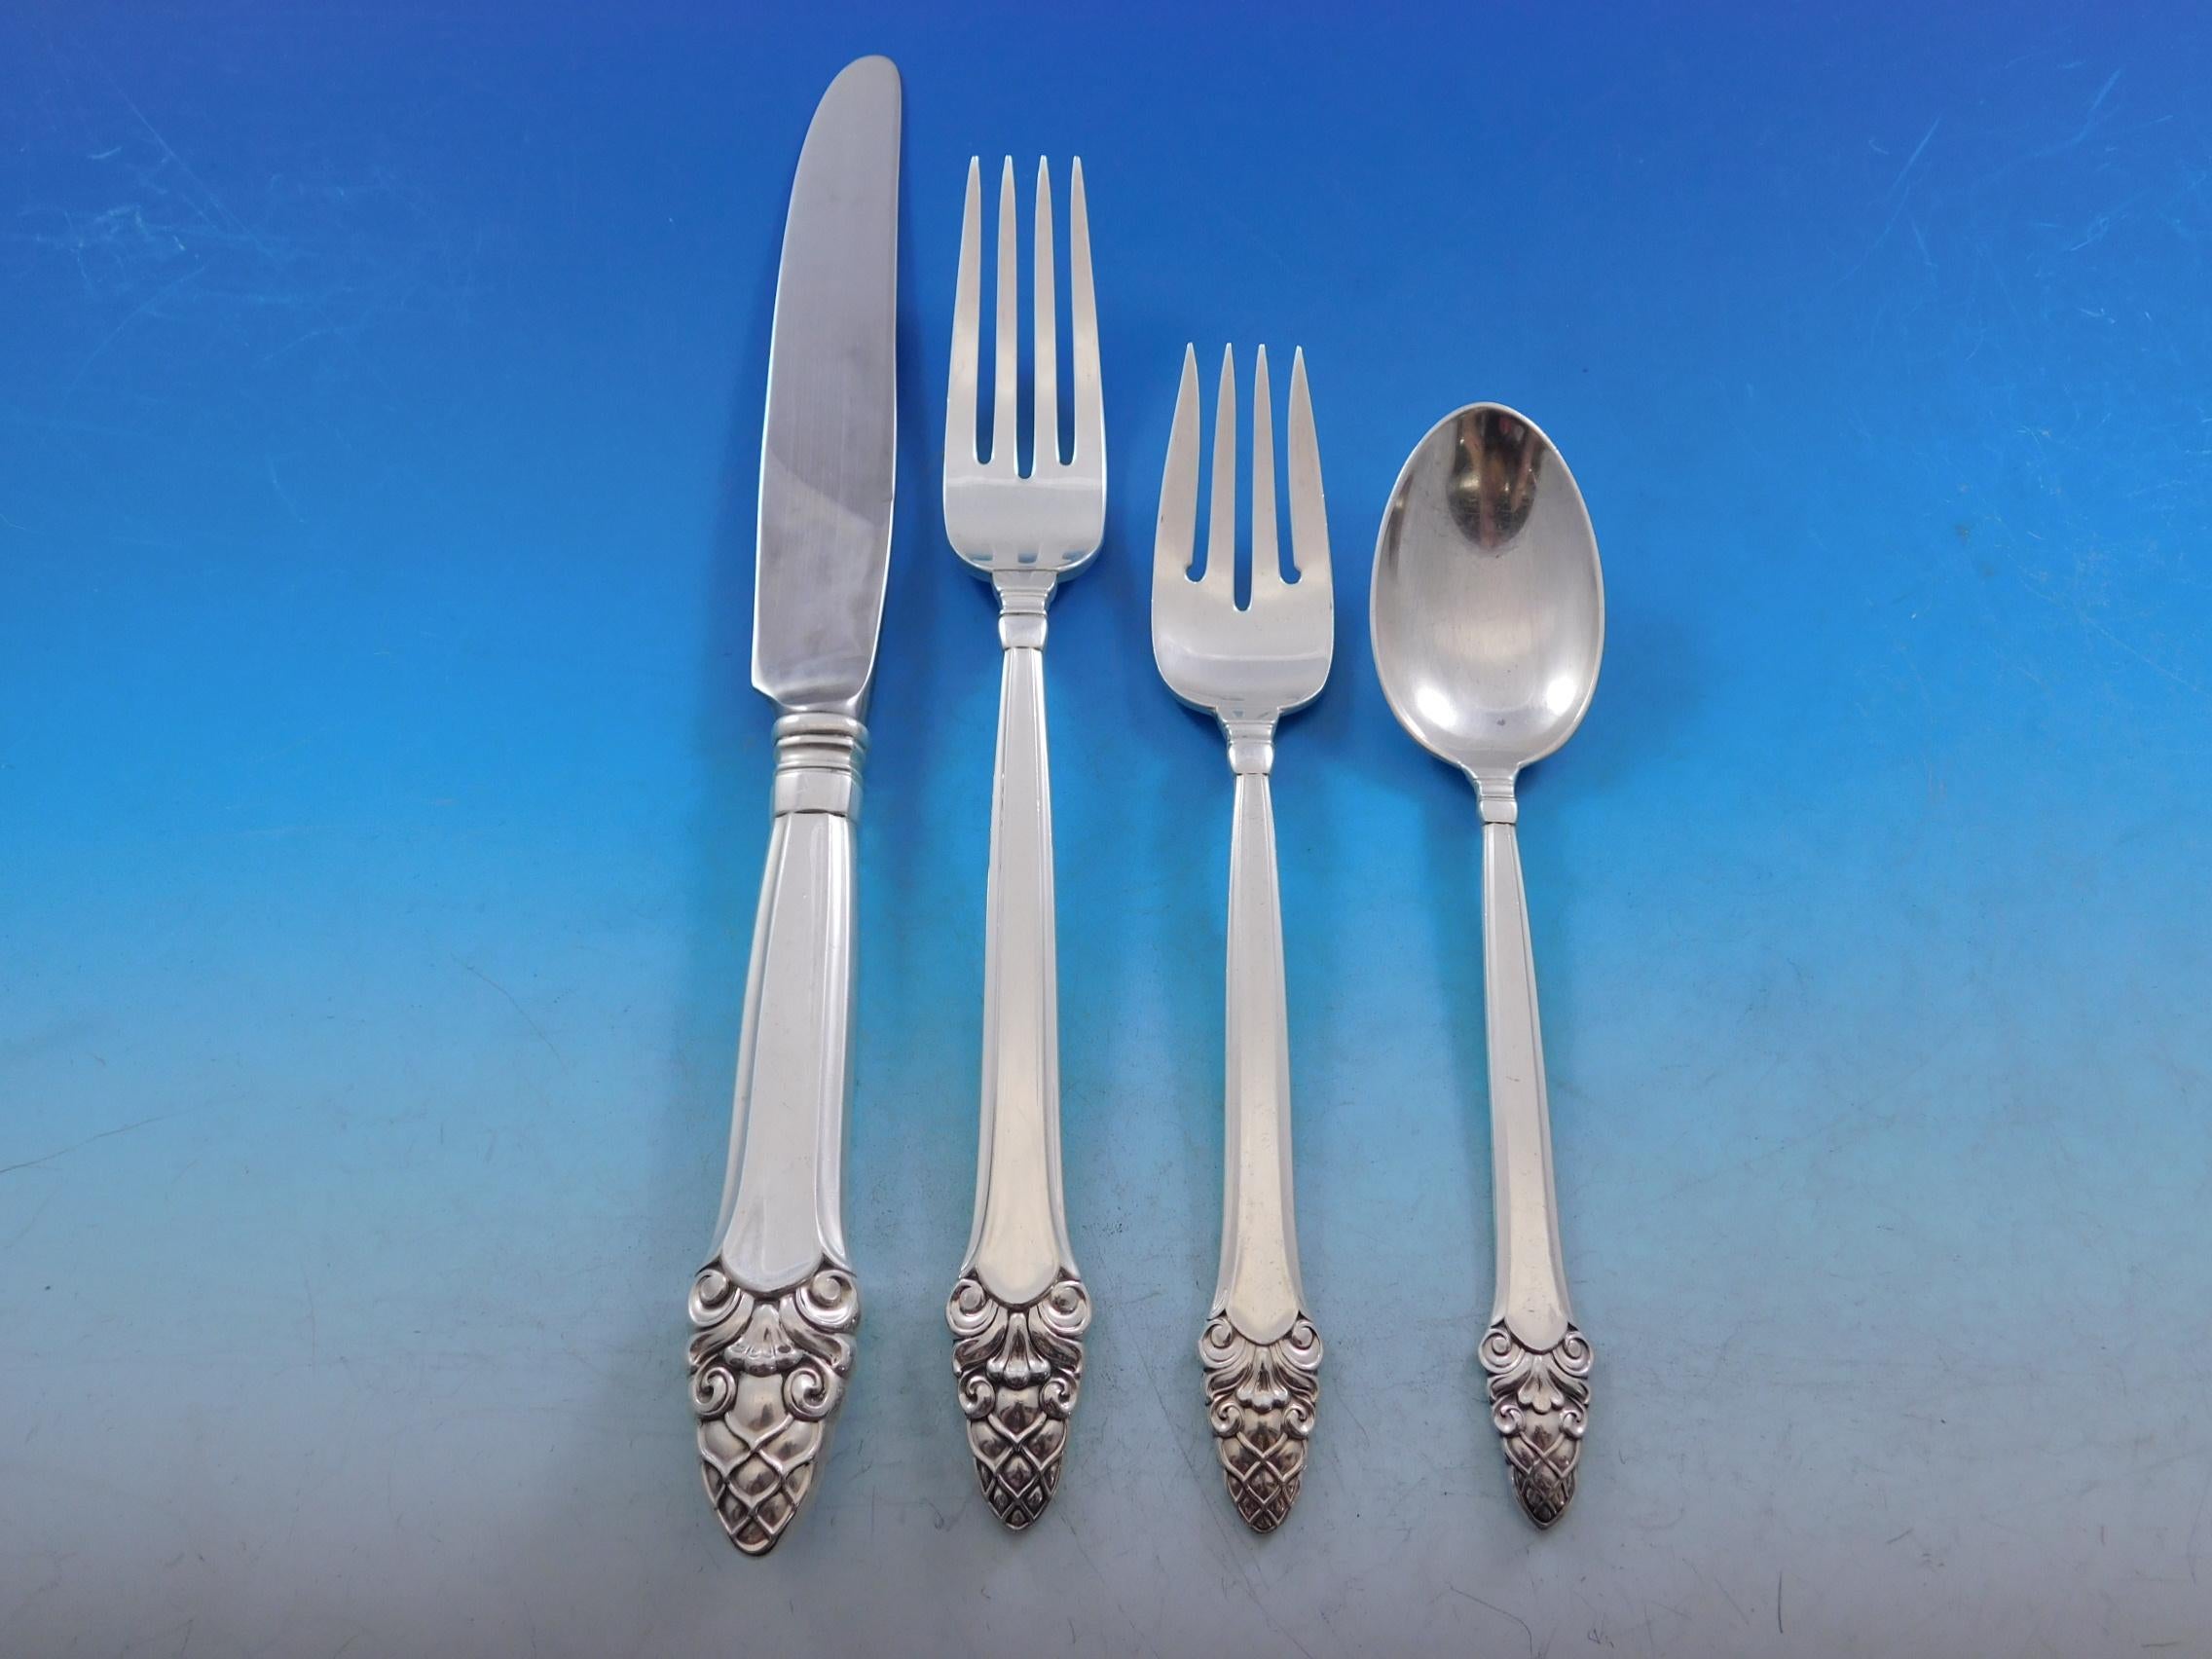 Sovereign Old by Gorham (1941) Sterling Silver Flatware set with stylized acorn motif - 138 pieces. This set includes:

8 Dinner Knives, 9 5/8